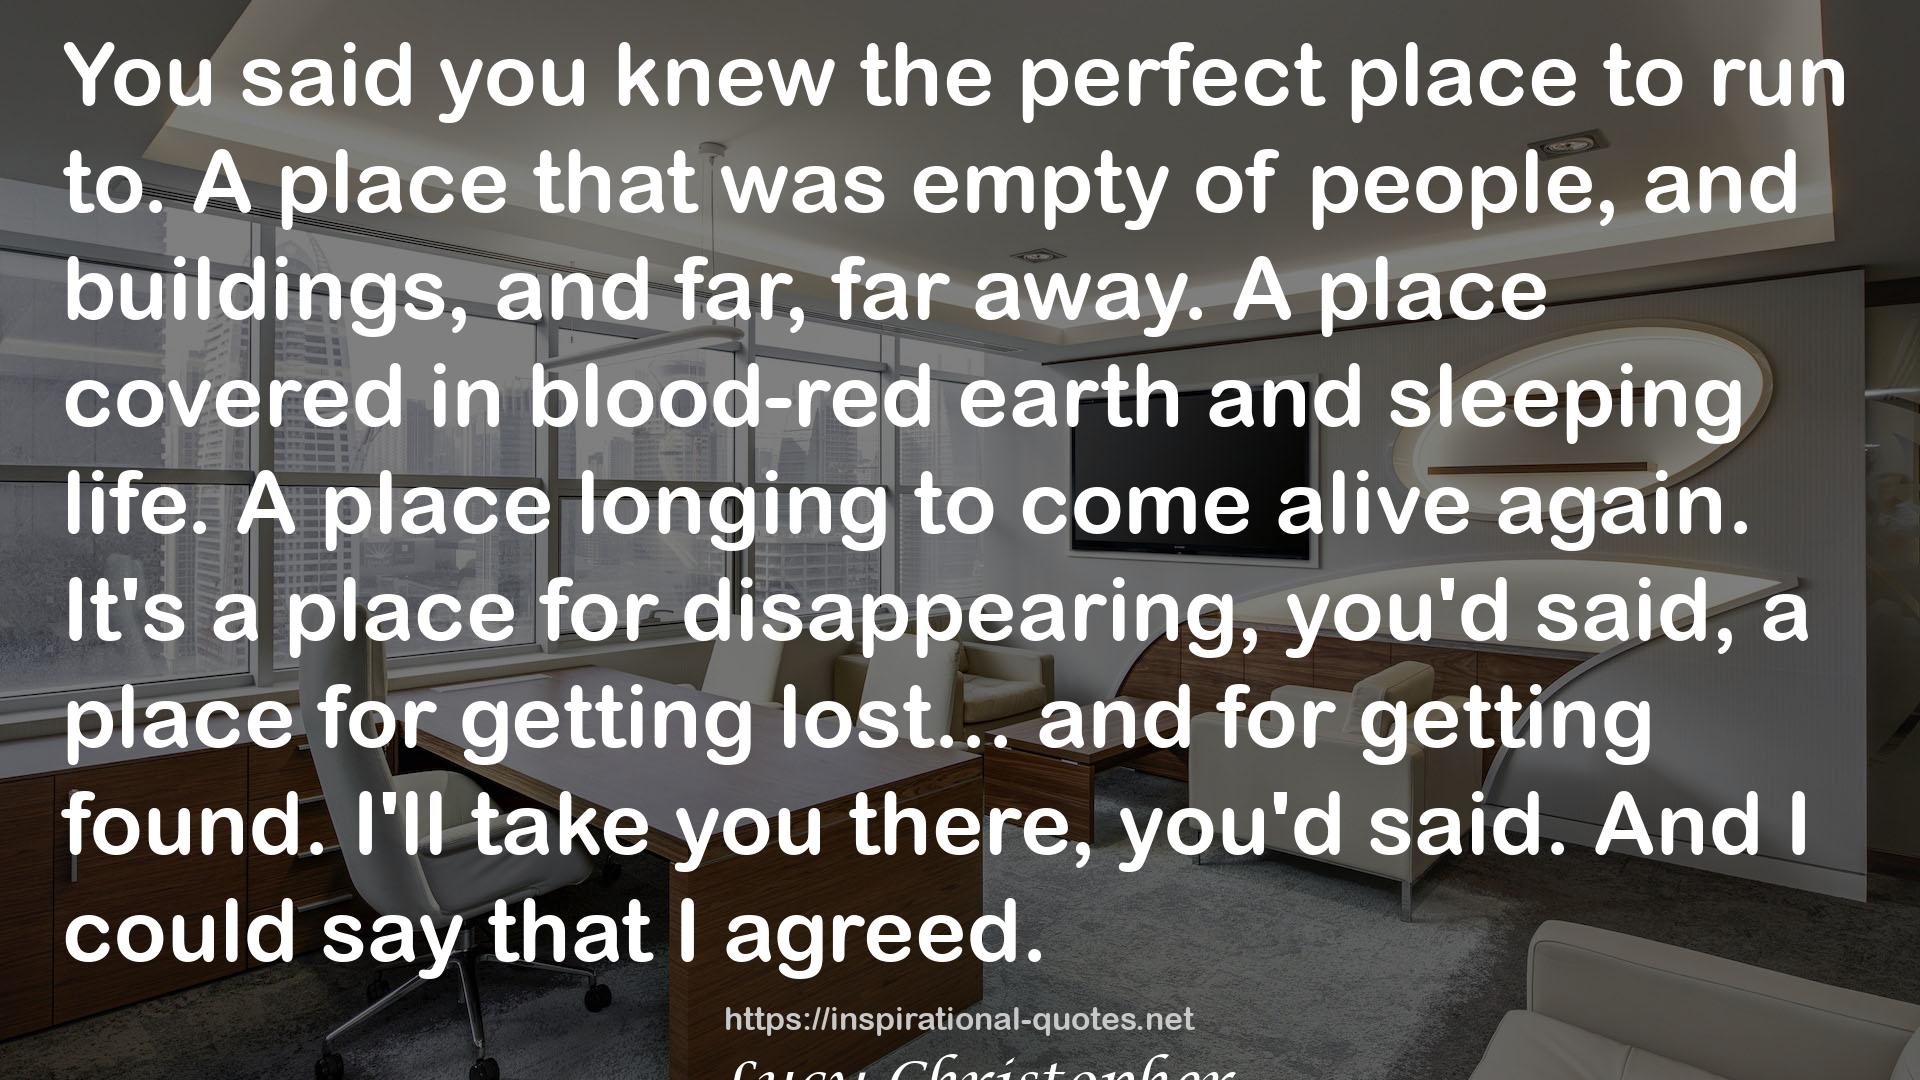 blood-red earth  QUOTES